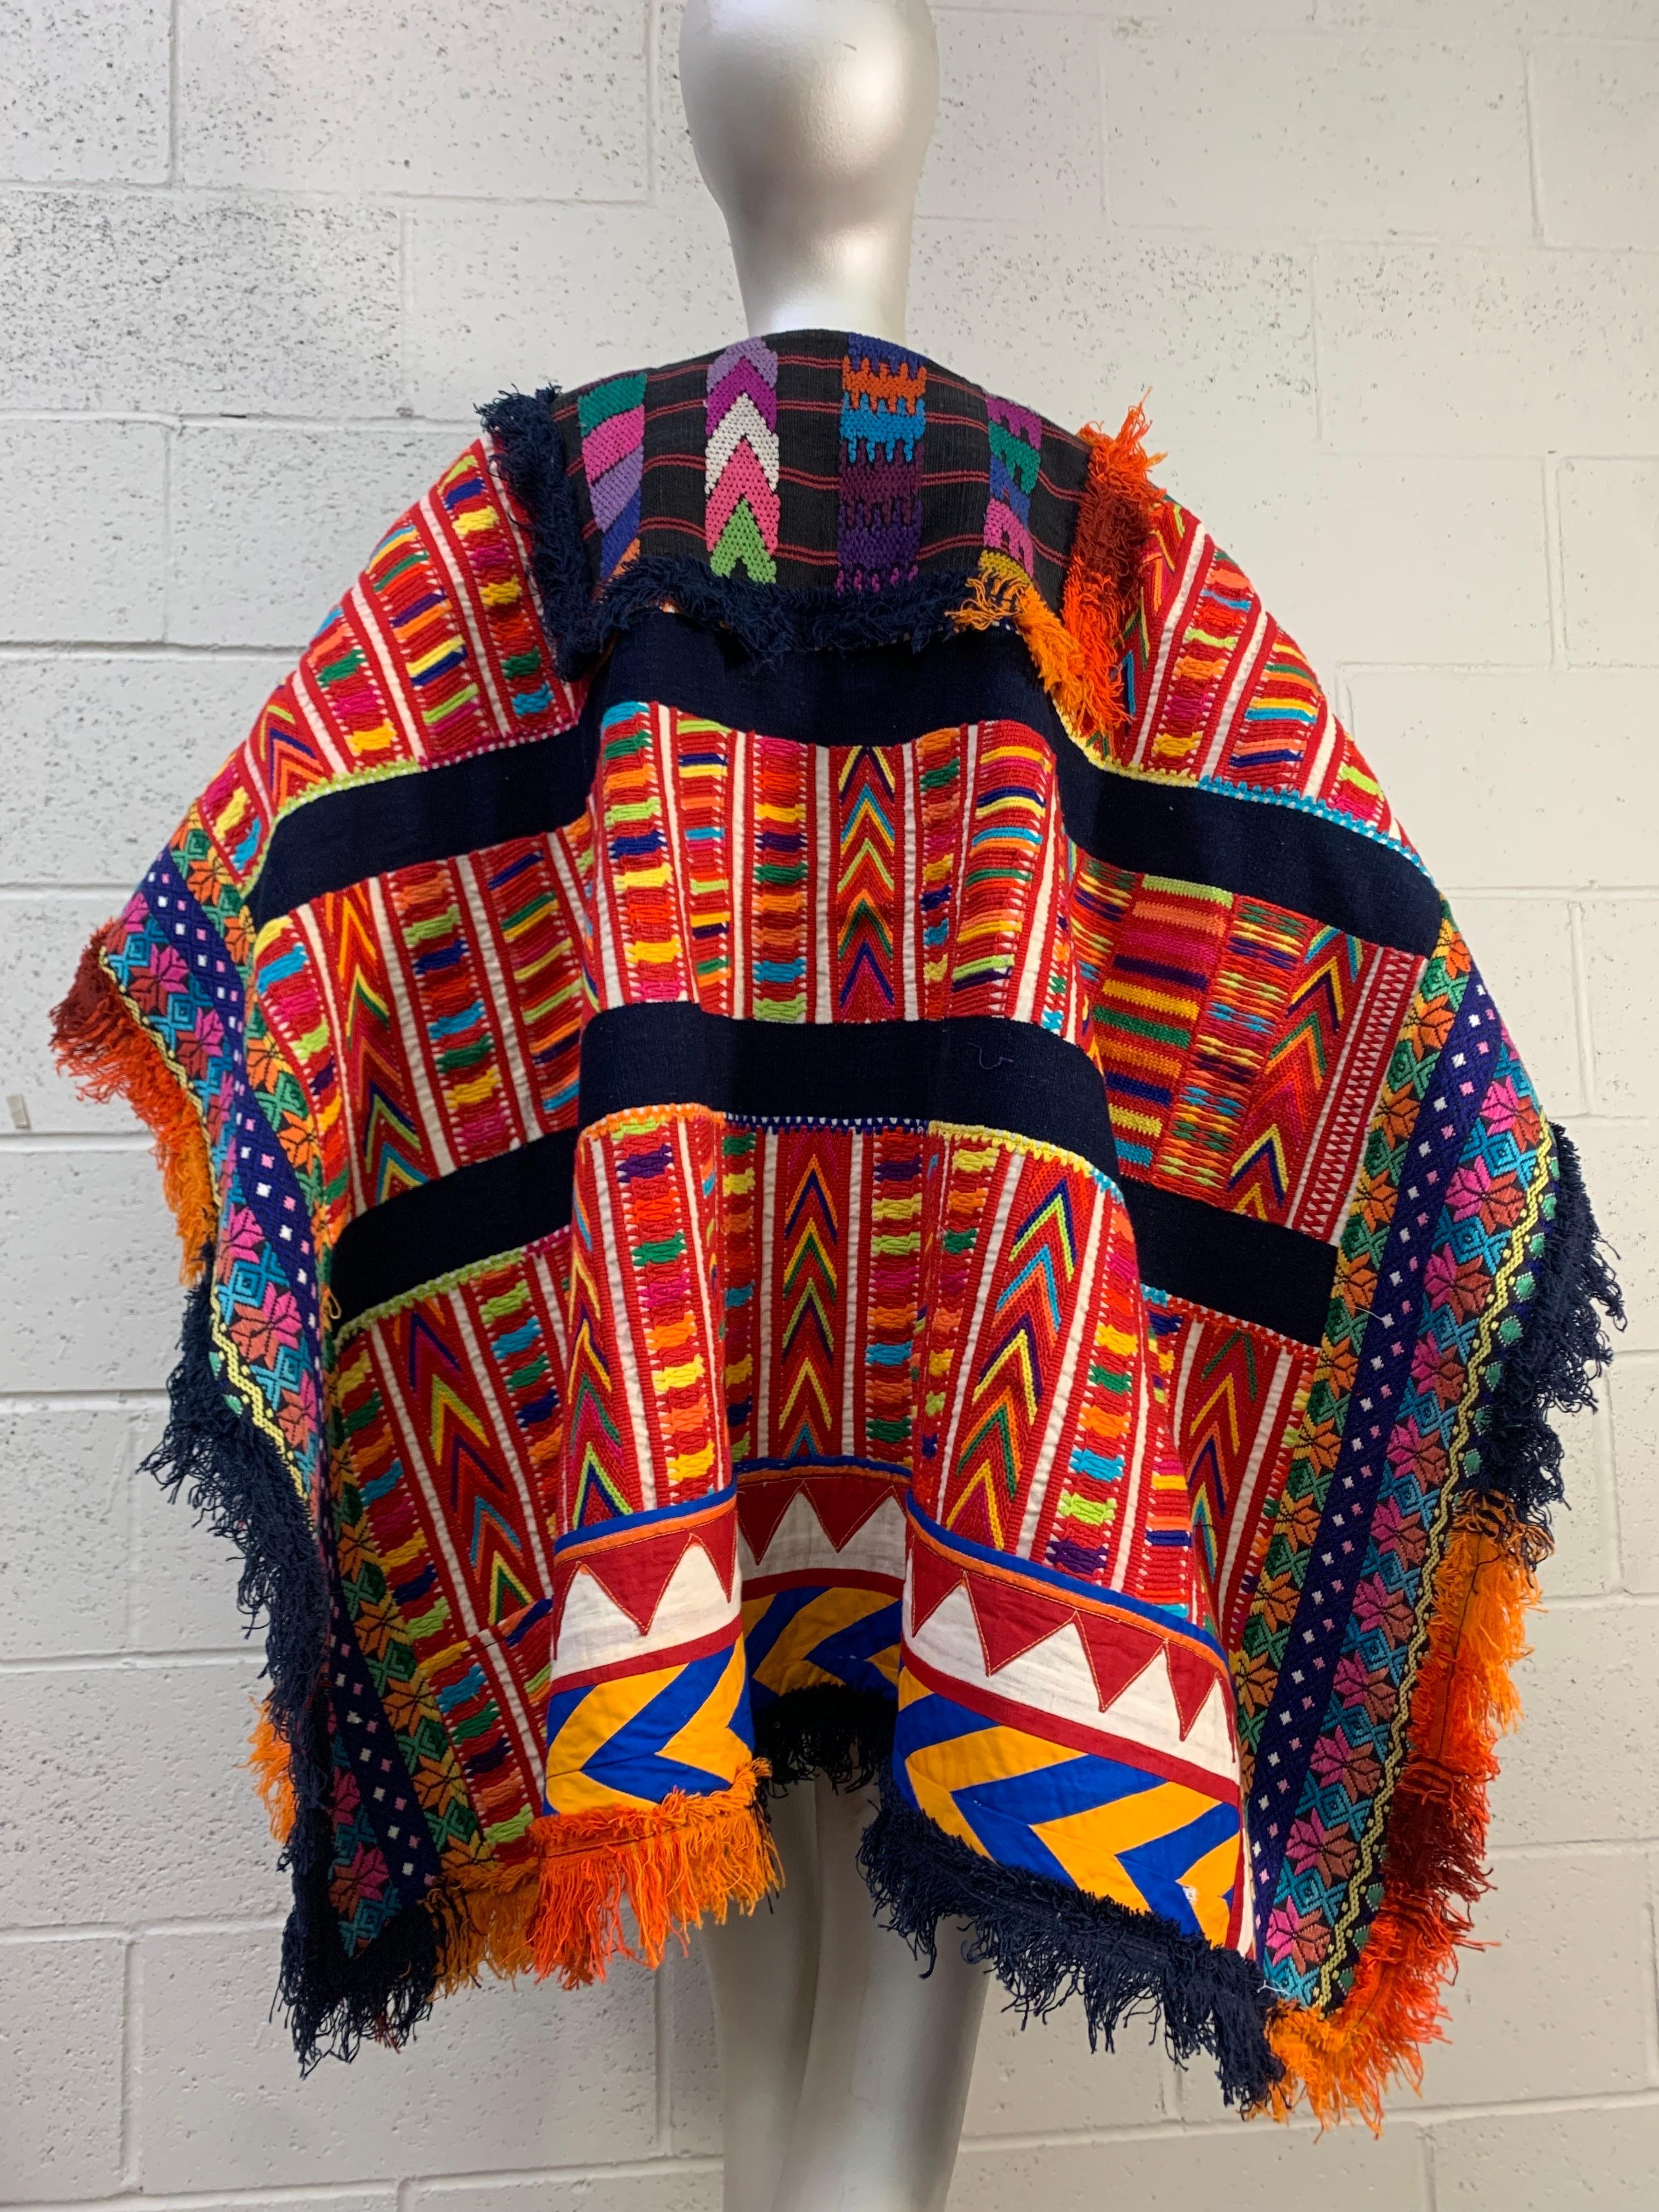 Torso Creations Art-To-Wear Woven & Embroidered Sarape  Poncho in Vivid Colors For Sale 10